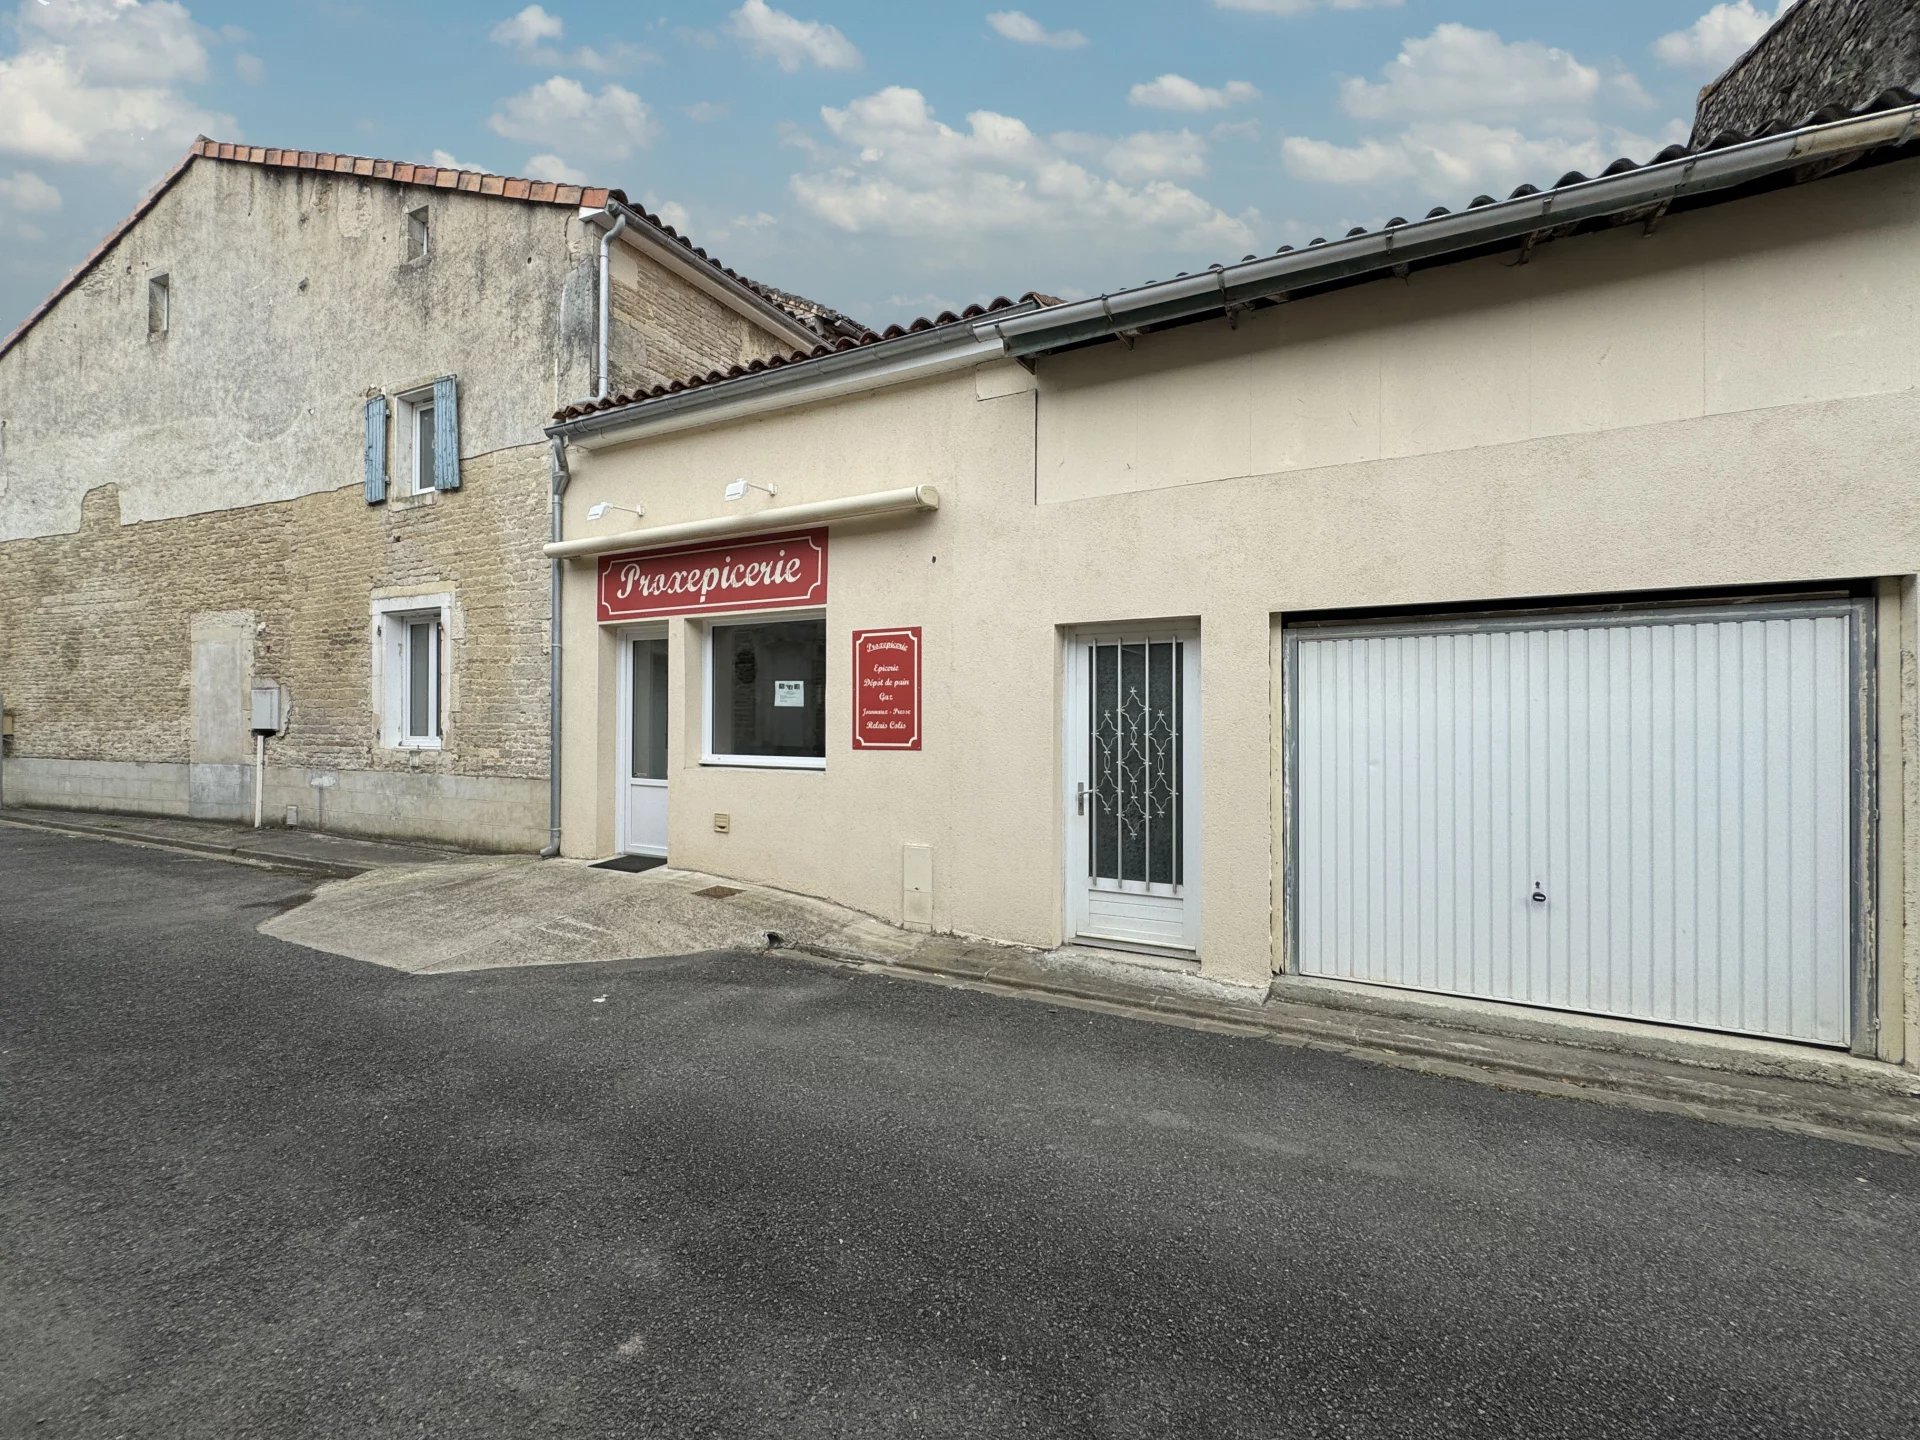 A local shop with a garage and possibility of a 3 bedroom property